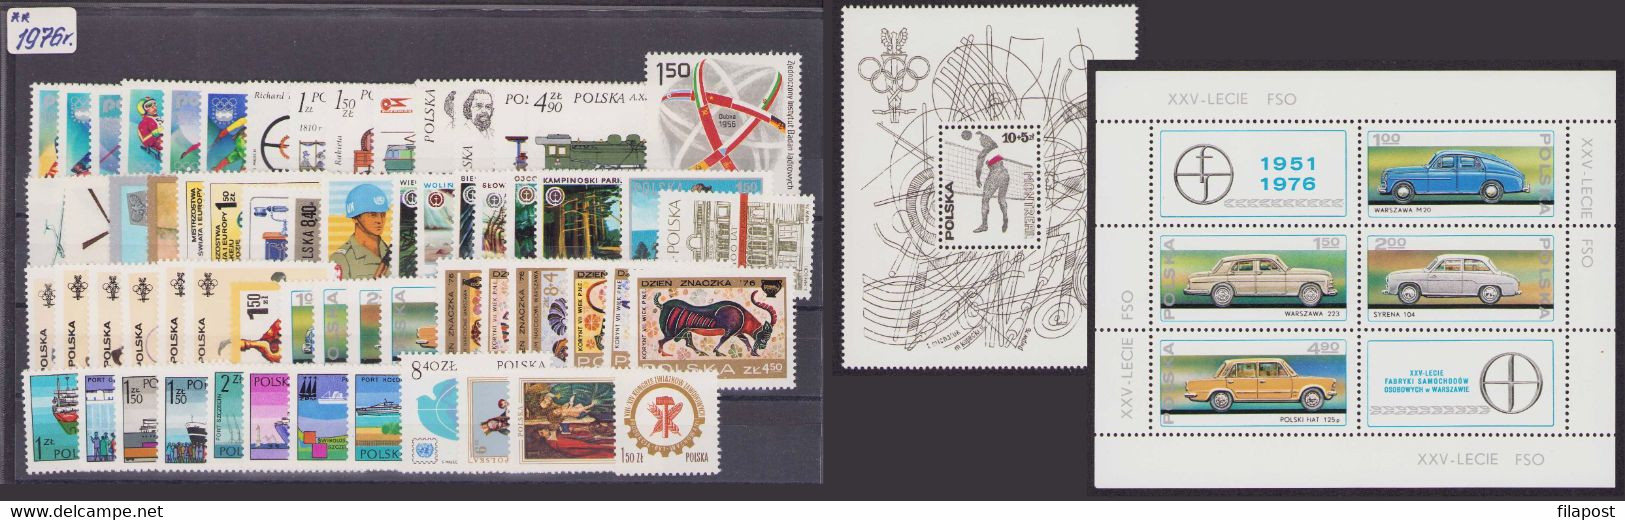 Poland 1976 Full Year / Car Factory In Warsaw, Fiat, Syrena / Sport, Volleyball, Olympics, Transport MNH** - Años Completos